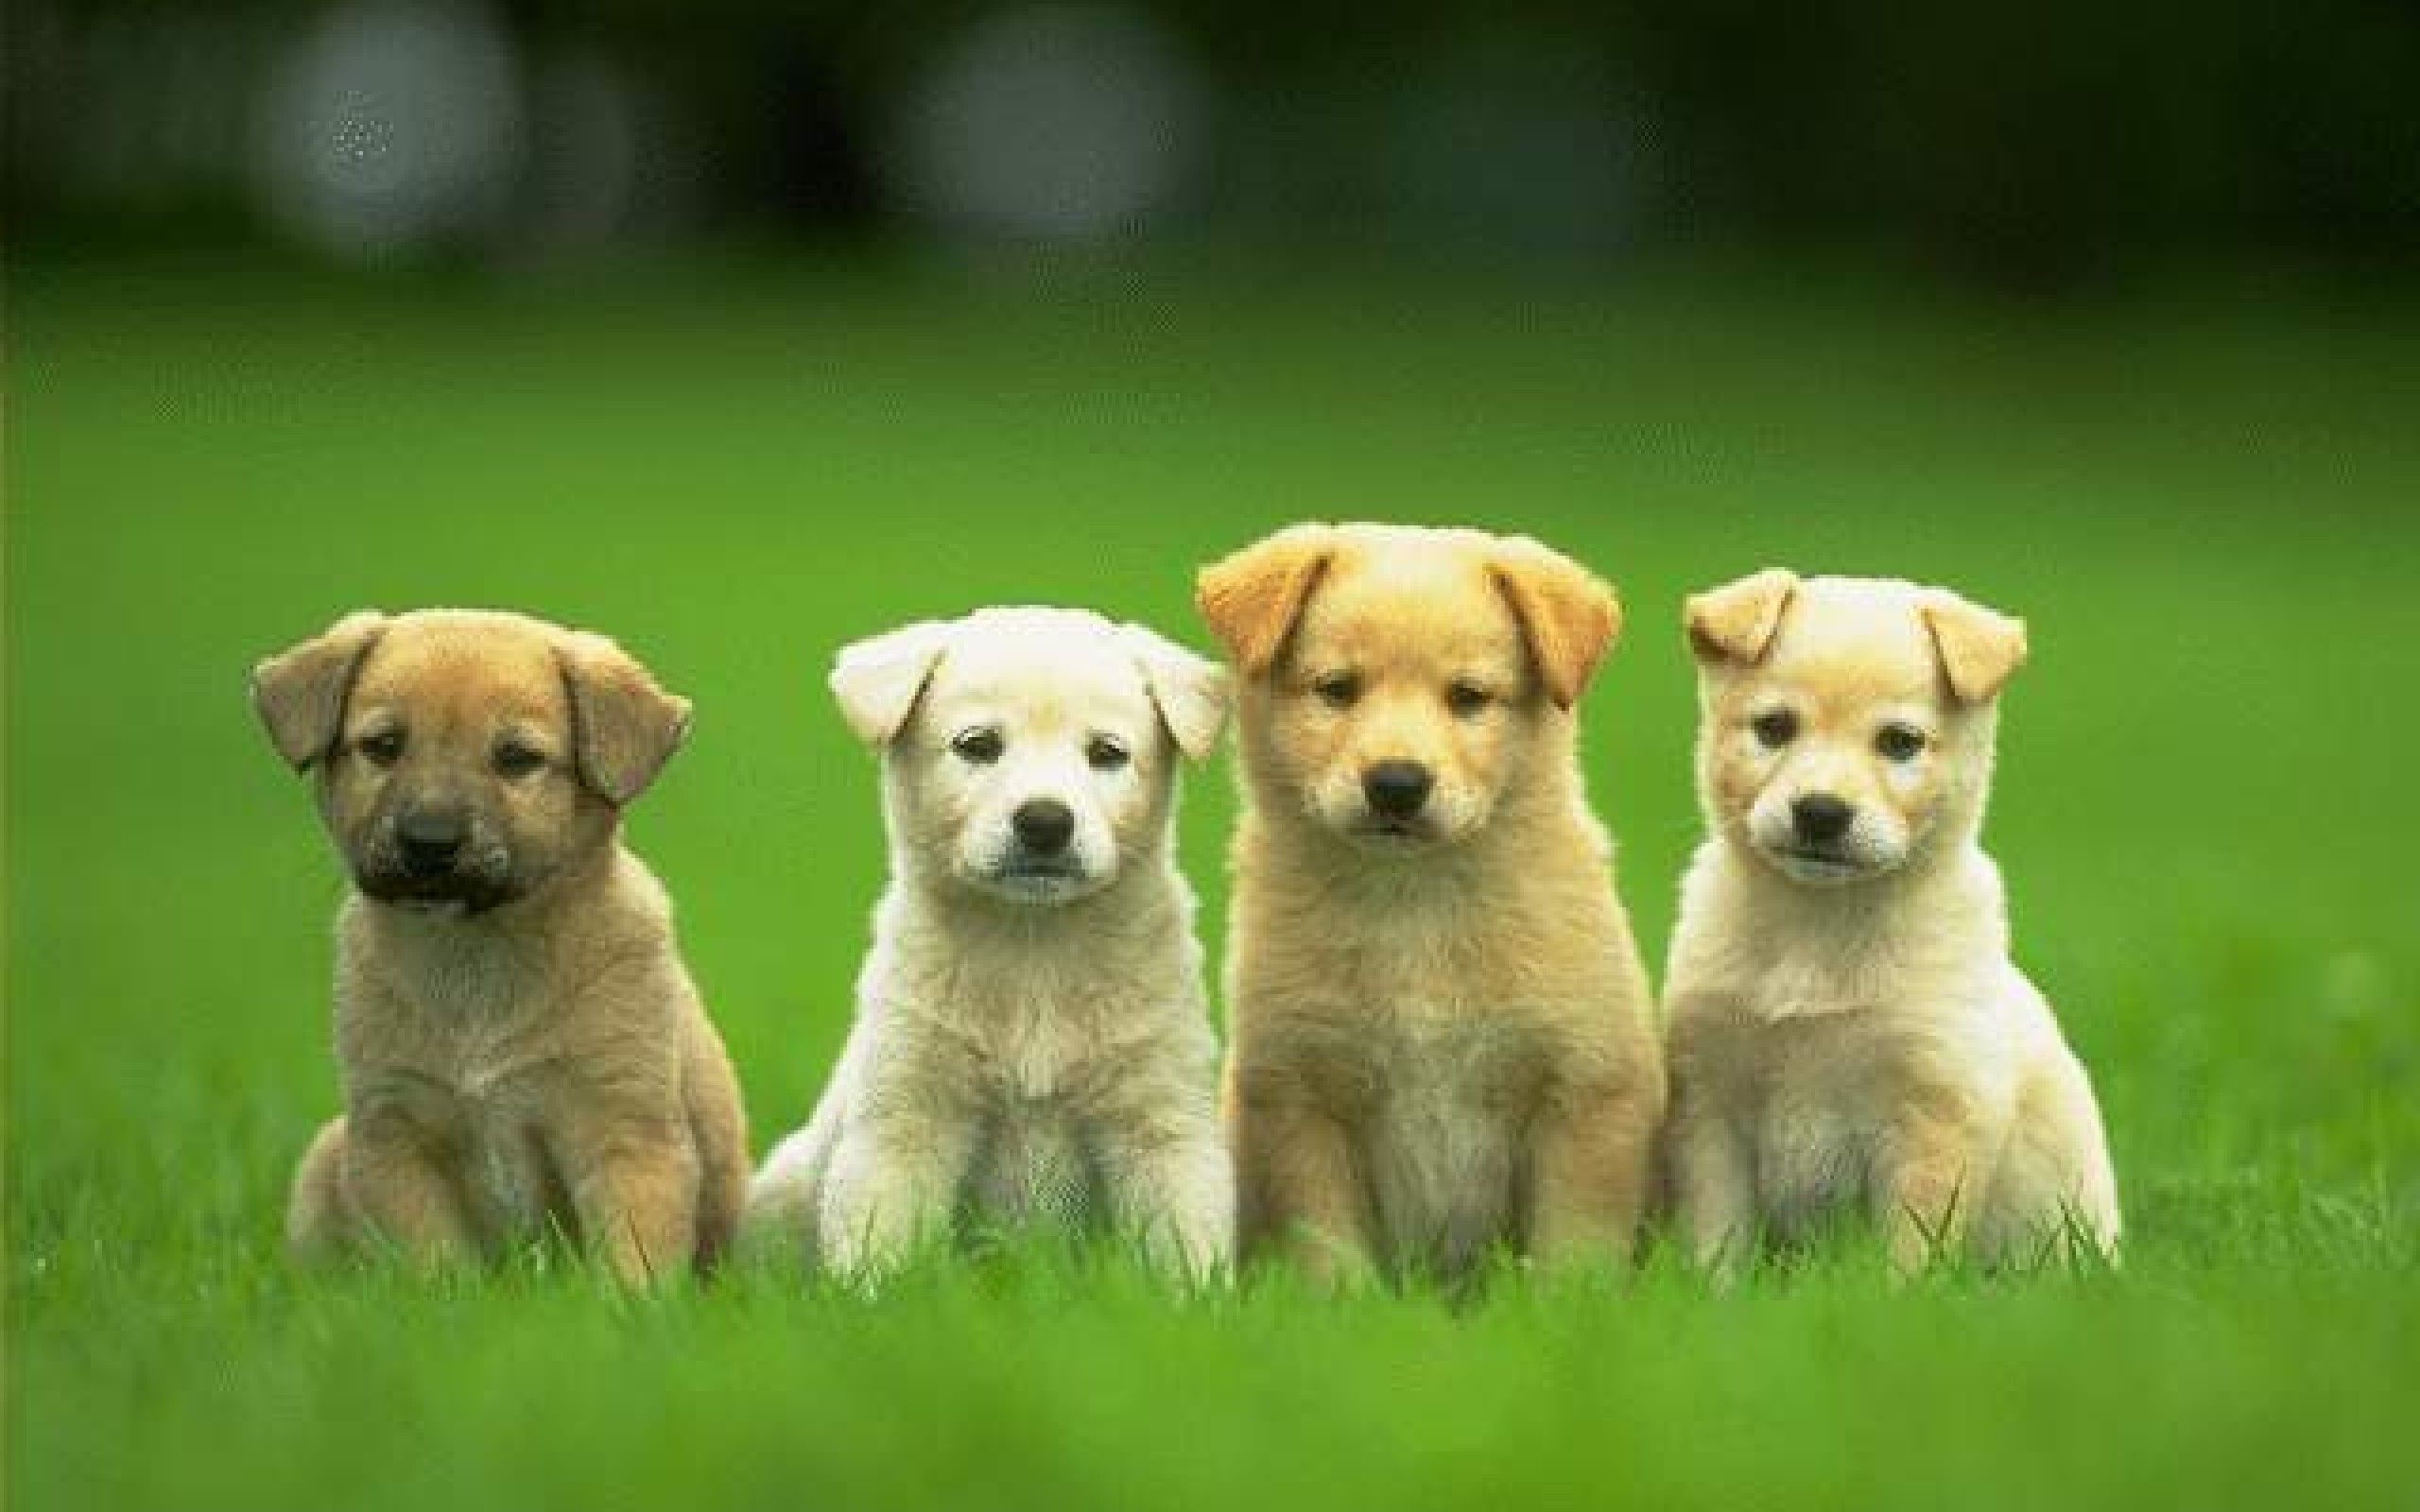 Cute Puppy Dog Wallpapers